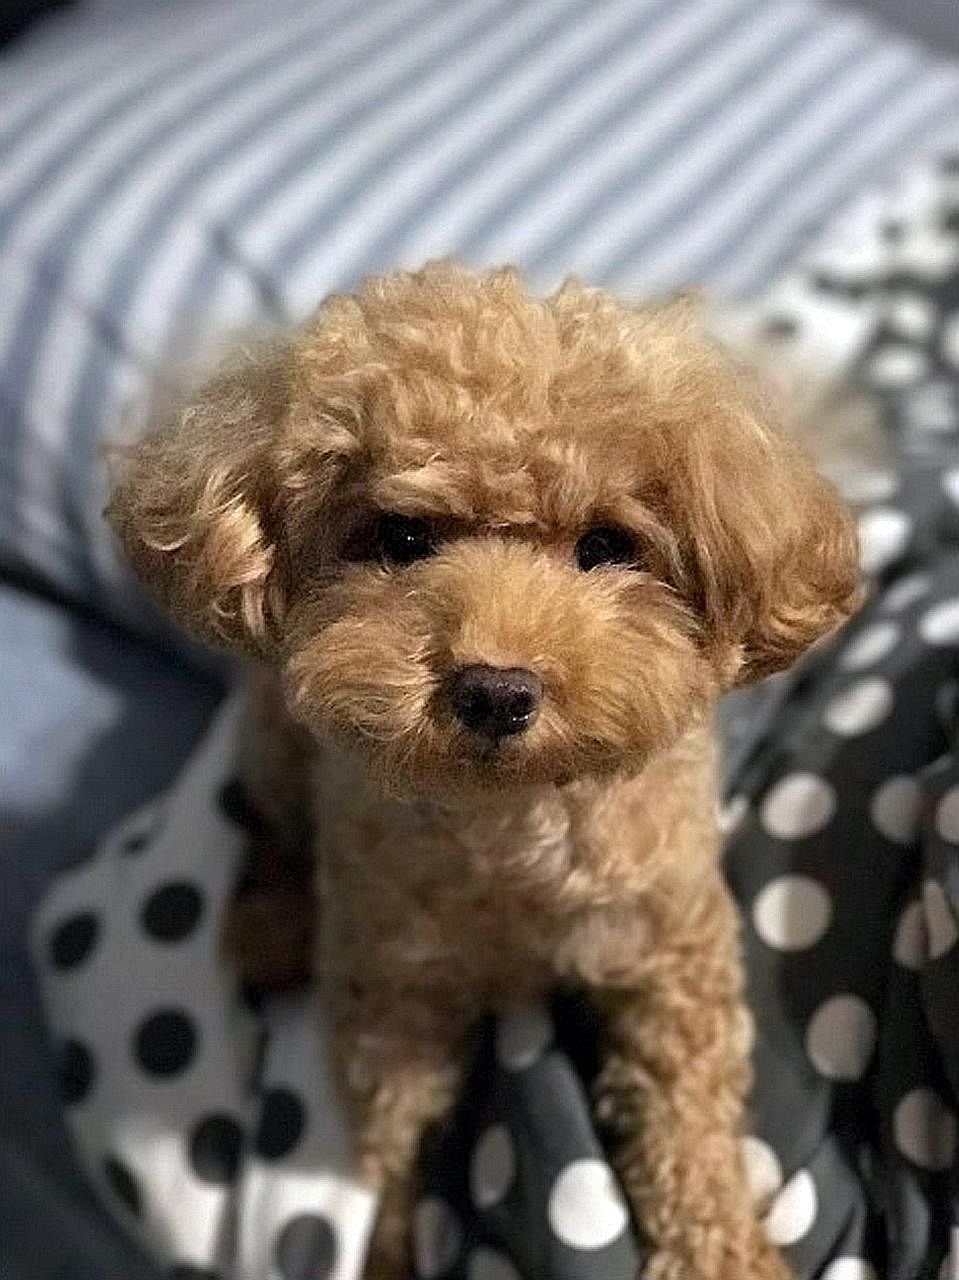 Gerald Kok Zhin Oi allegedly ill-treated the toy poodle between July and December last year. He is accused of hitting it with a cushion and clothes hanger. He also allegedly flung the dog on a bed twice, and it hit the wall the second time.